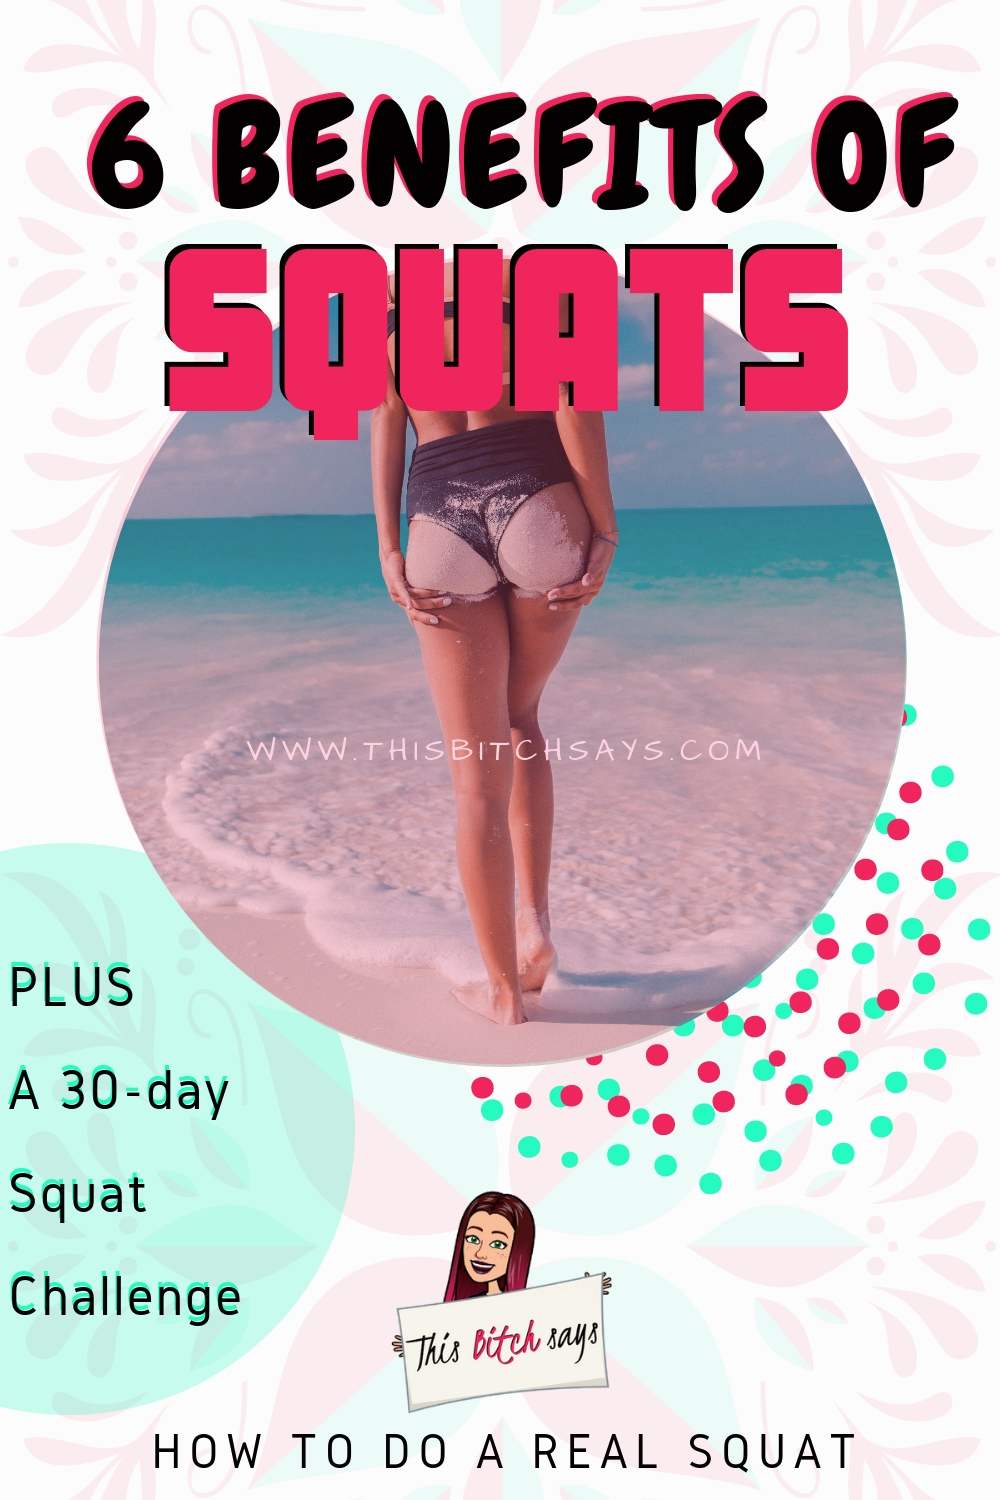 The 6 benefits of squats plus a 30-day squat challenge pin